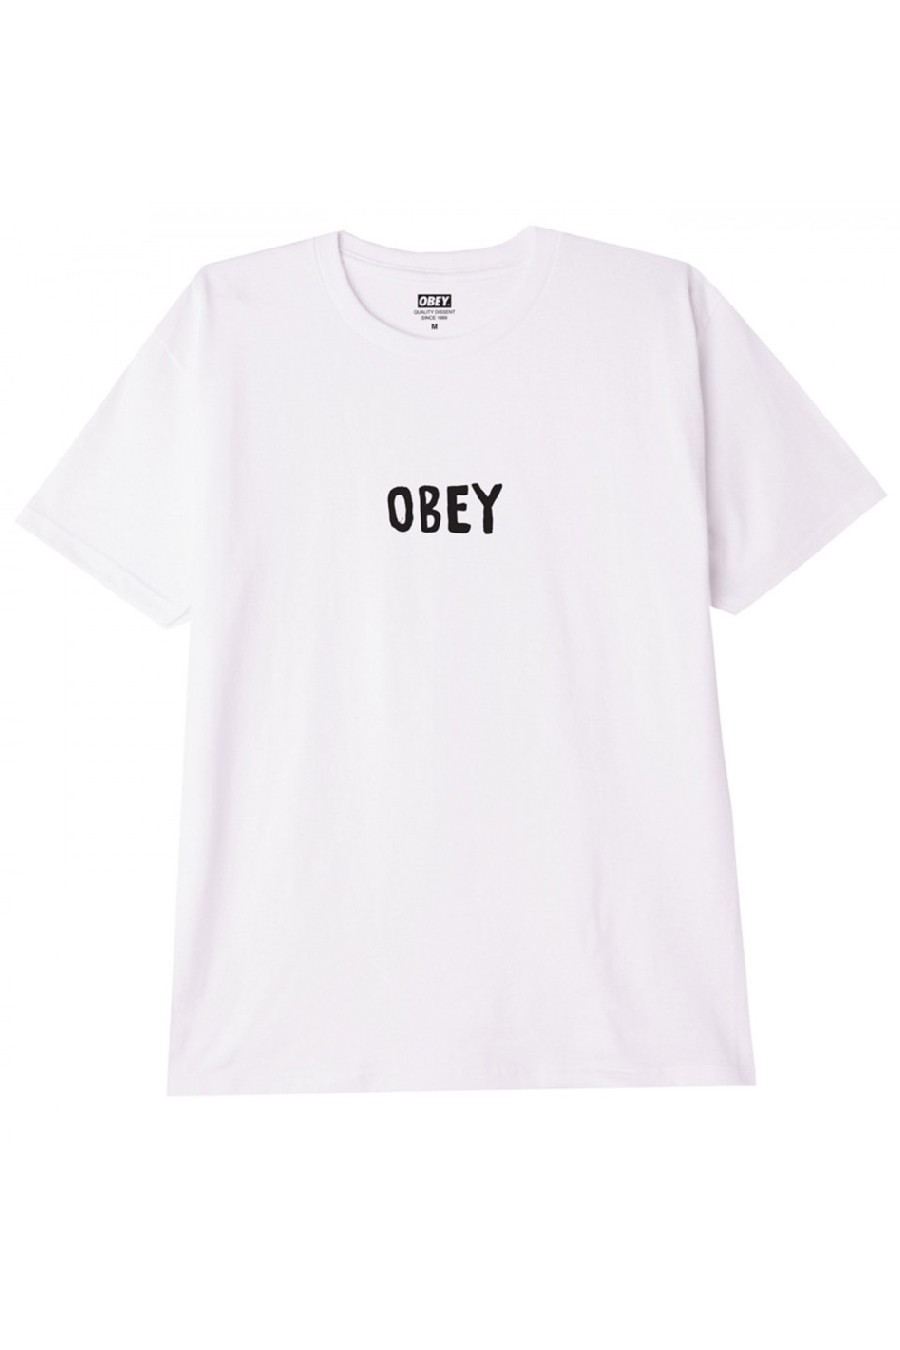 OBEY T-Shirts OBEY OG CLASSIC TEE - WHITE-OBEY165262601-122-WHITE 56433